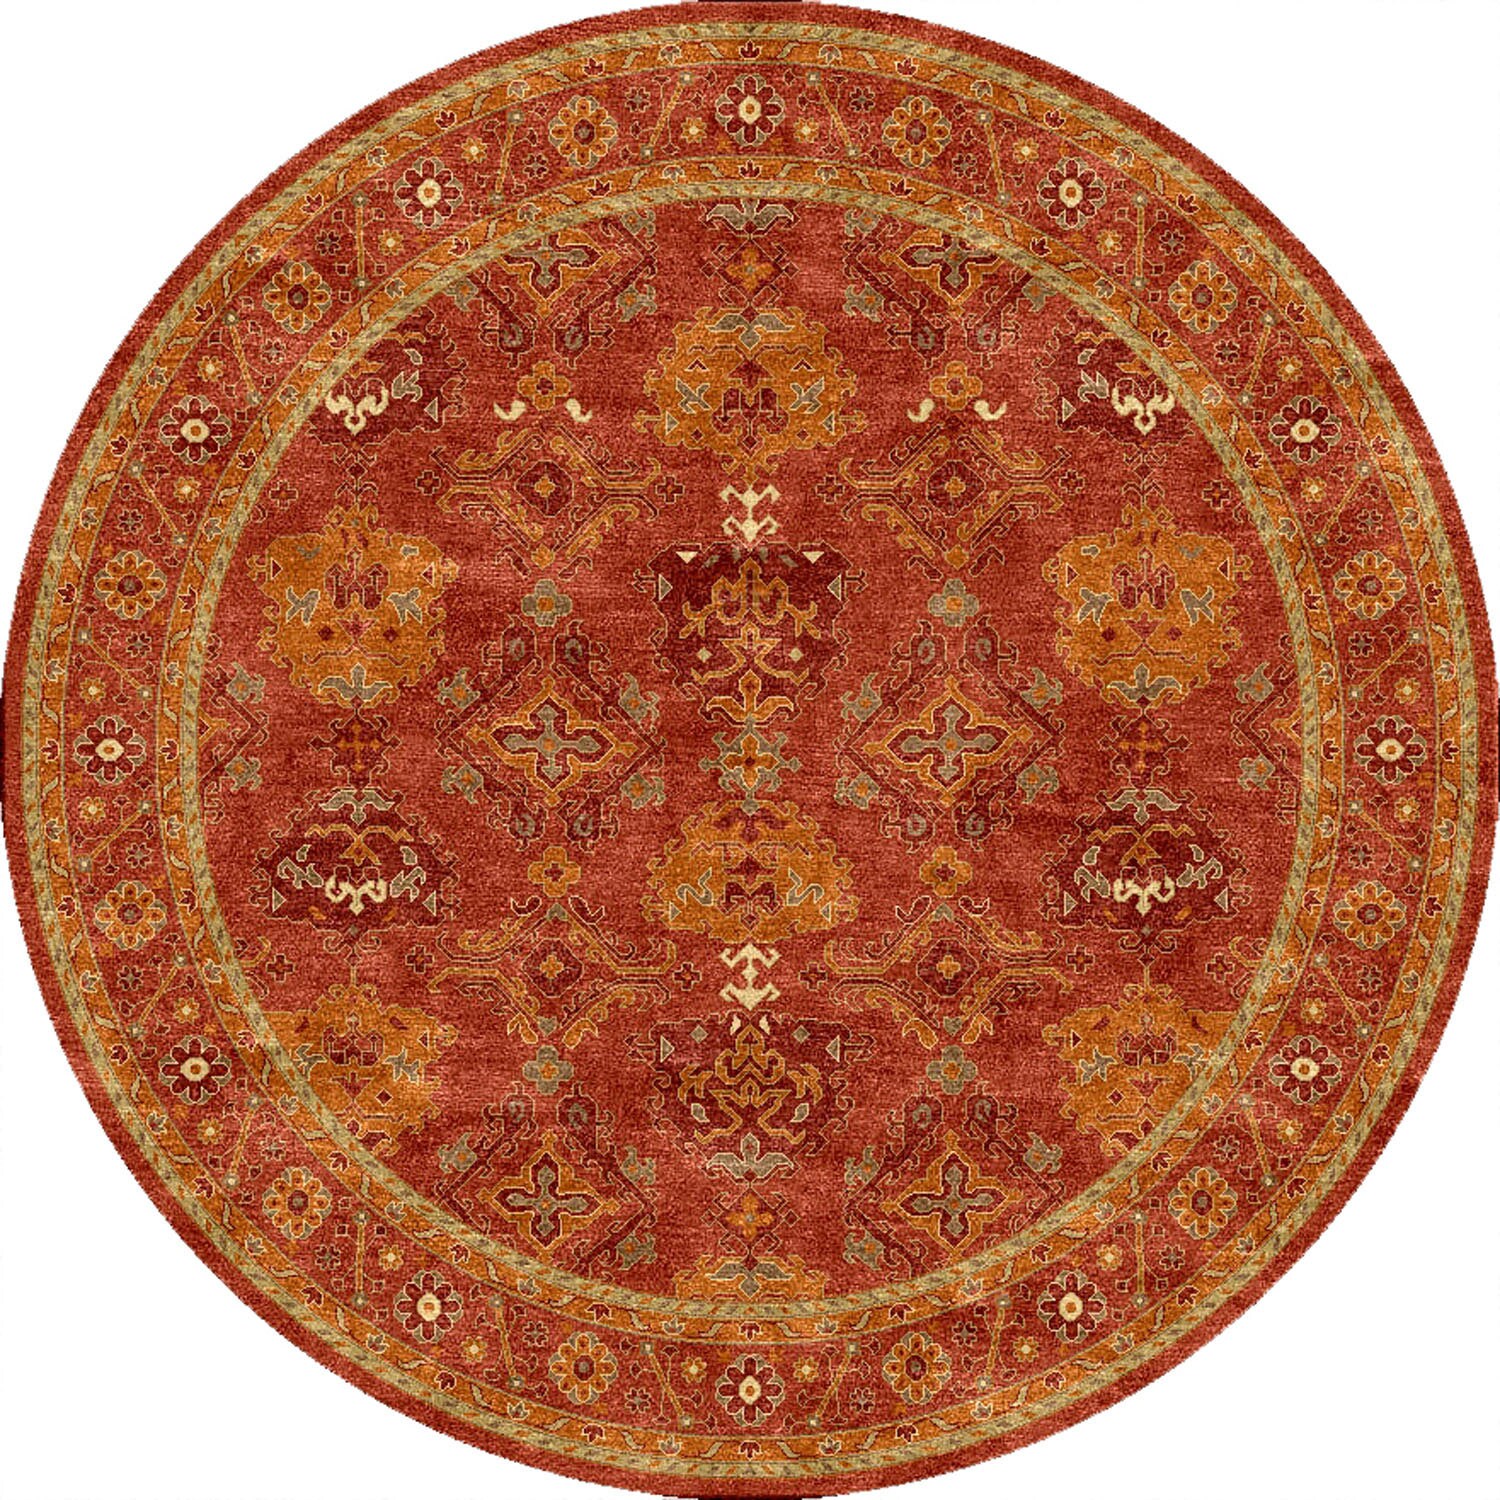 Hand tufted Traditional Floral Pattern Red/ Orange Rug (6 Round)